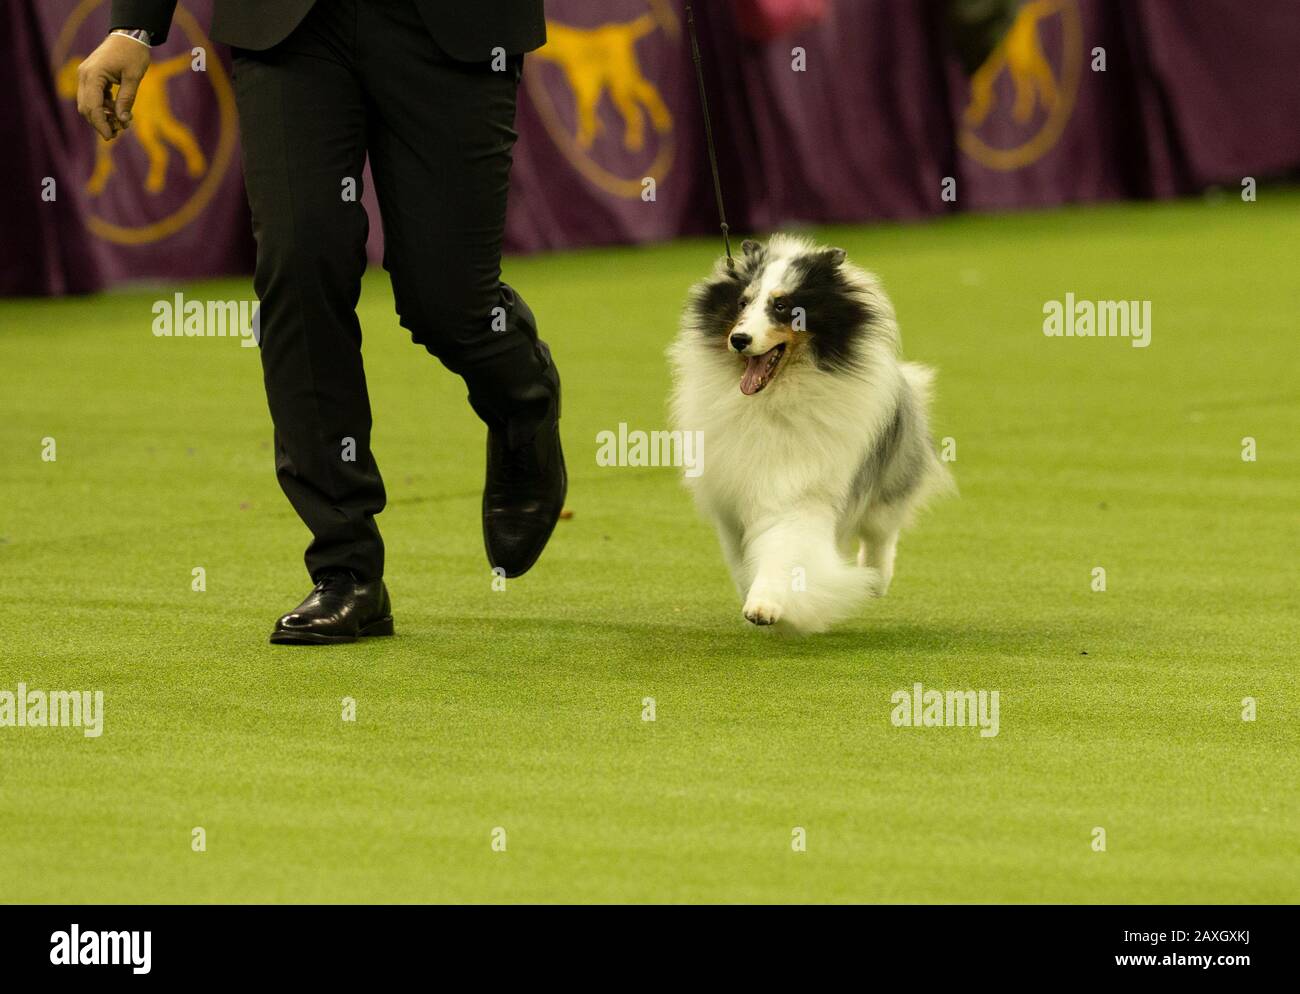 New York, NY - February 11, 2020: Winner of Herding Group Shetland Sheepdog named Conrad runs during 144th Westminster Kennel Club Dog Show at Madison Square Garden Stock Photo